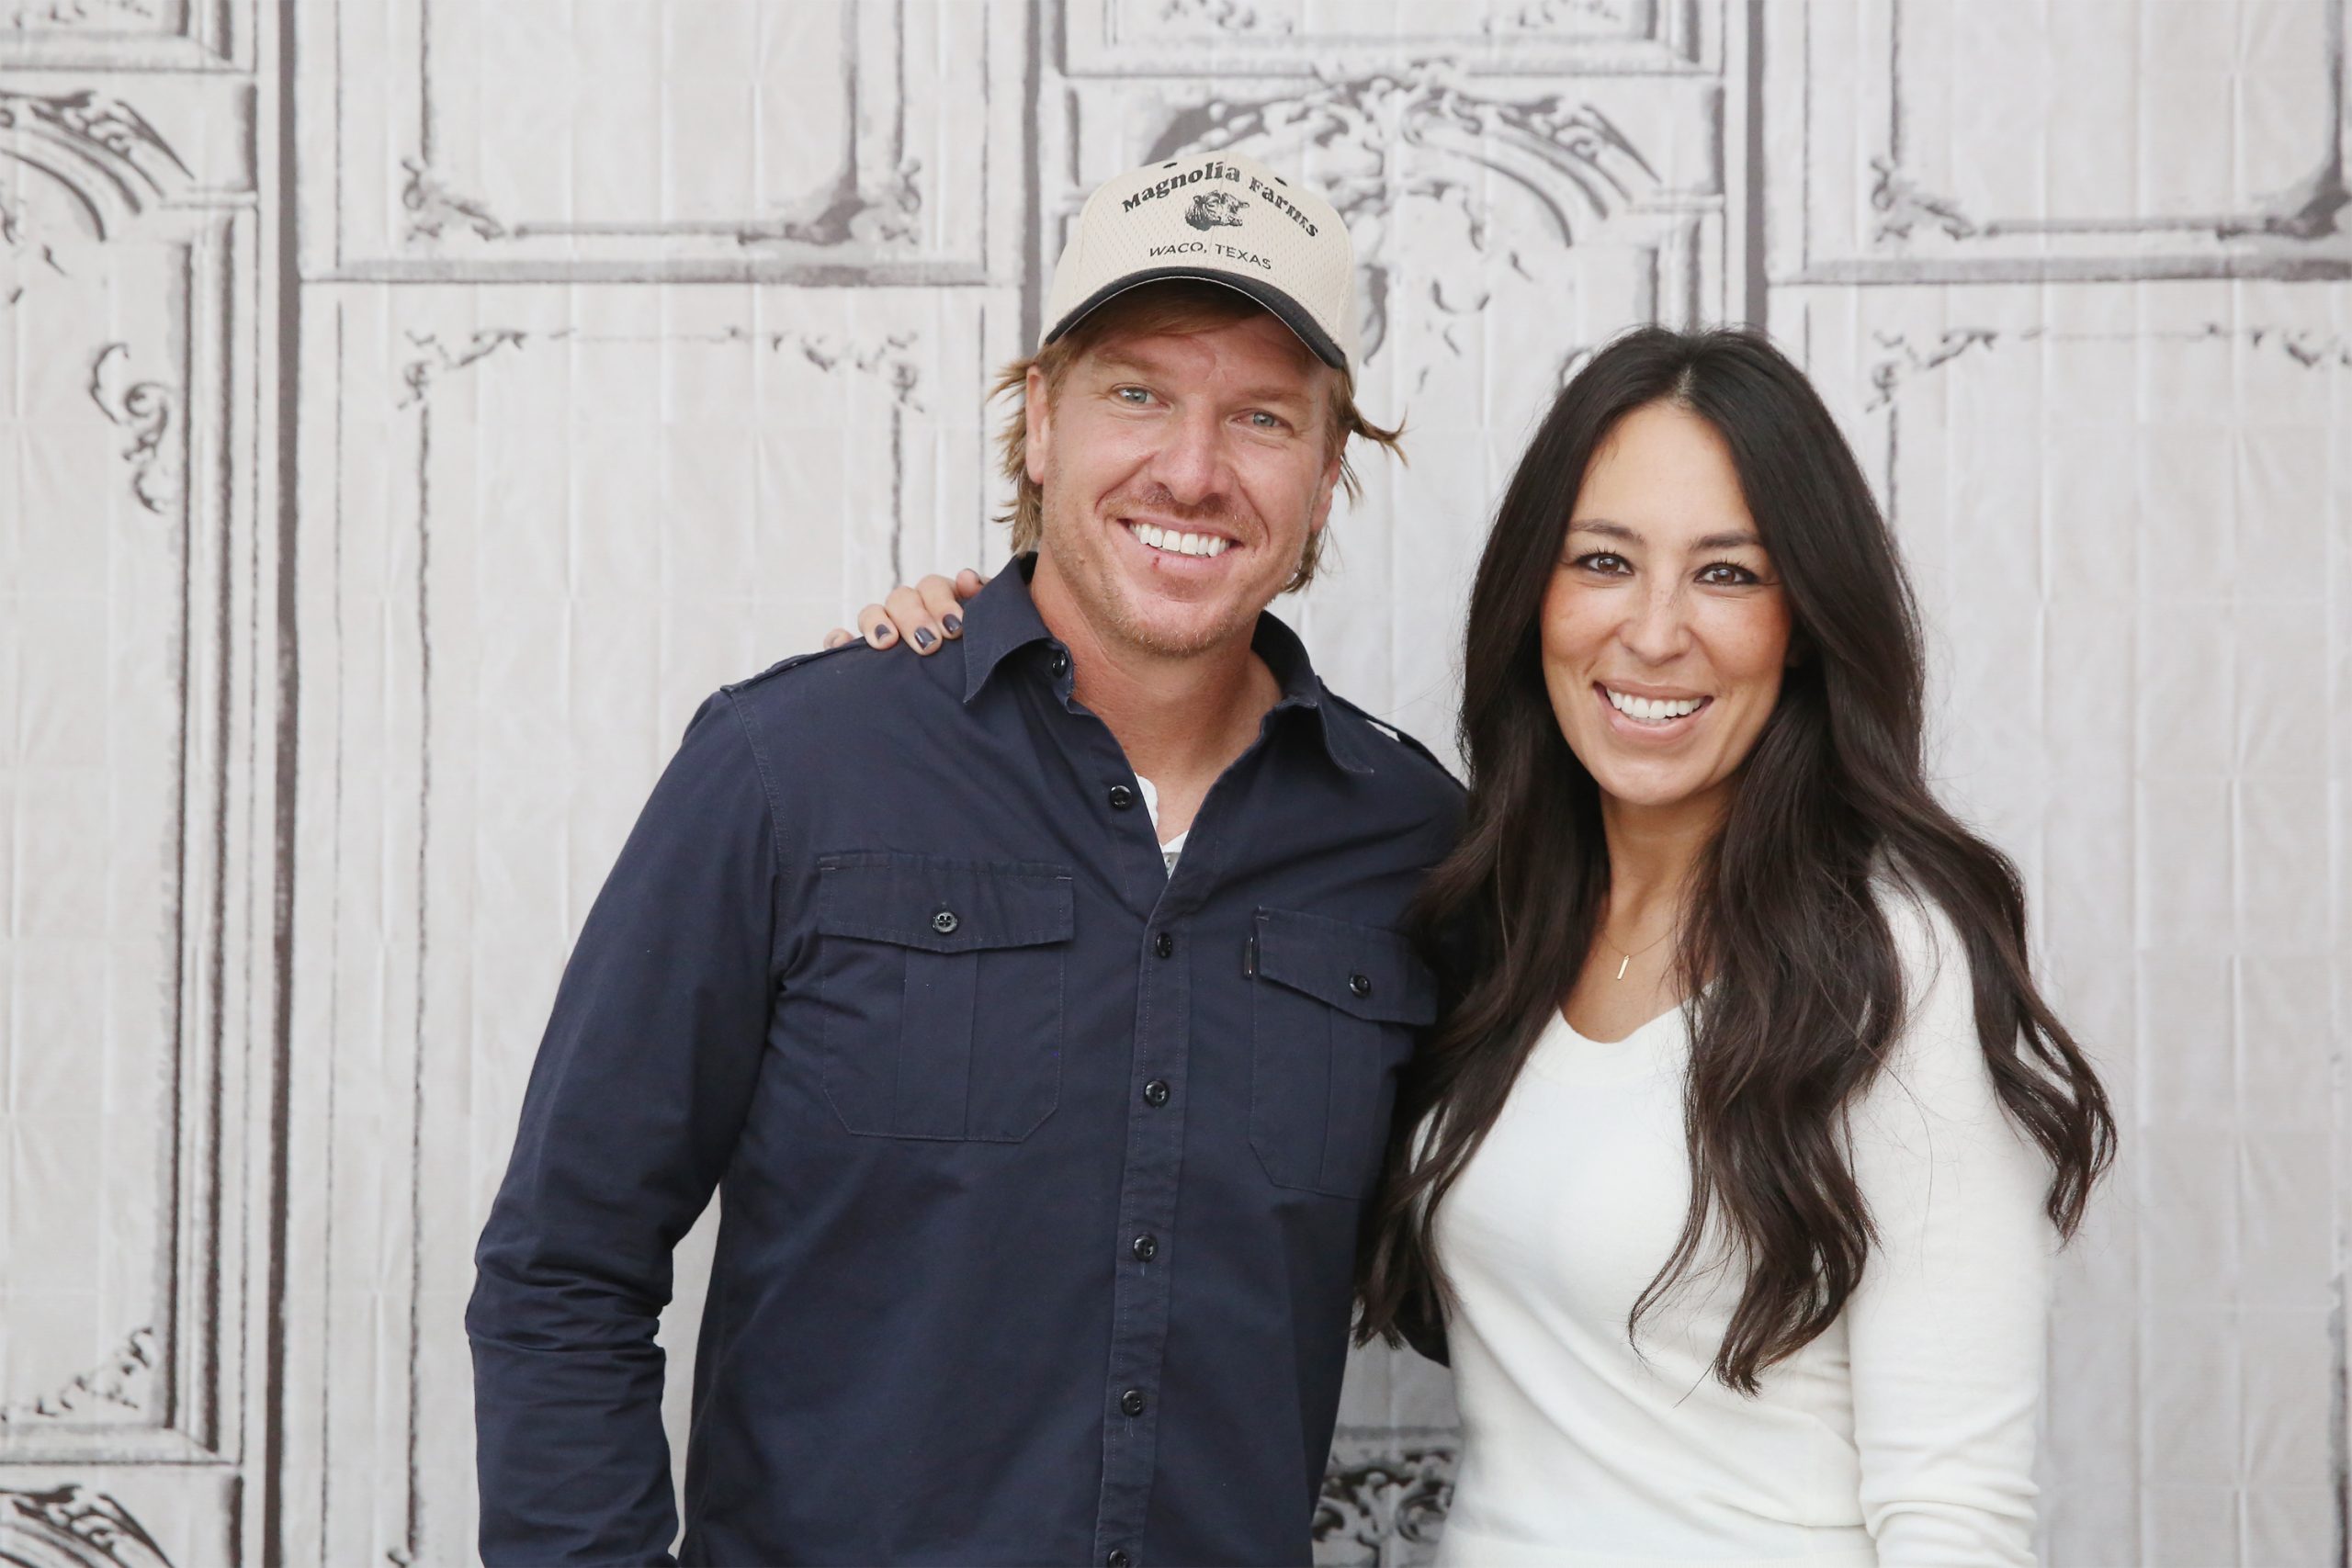 Chip and Joanna Gaines Said Their Castle Project Was the Longest, Most ‘Exhausting’ Renovation They’ve Ever Done